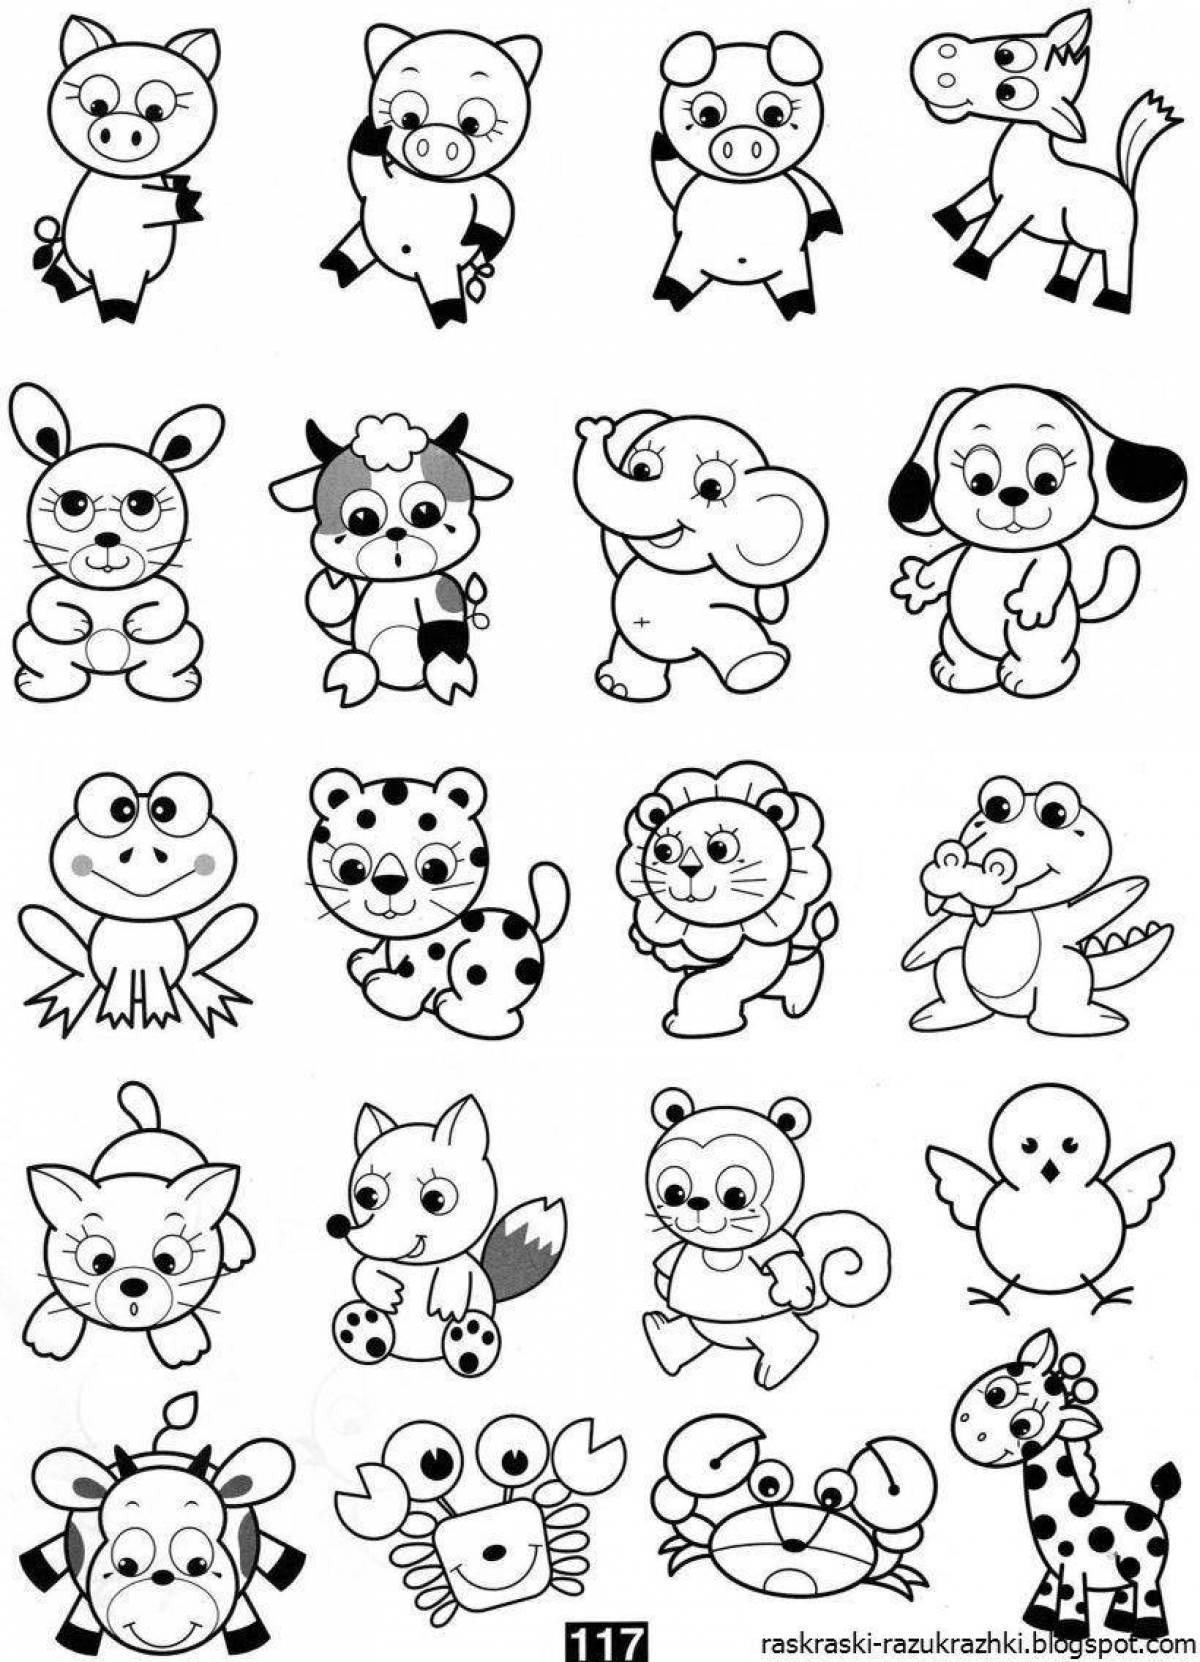 Amazing coloring pages cute little drawings